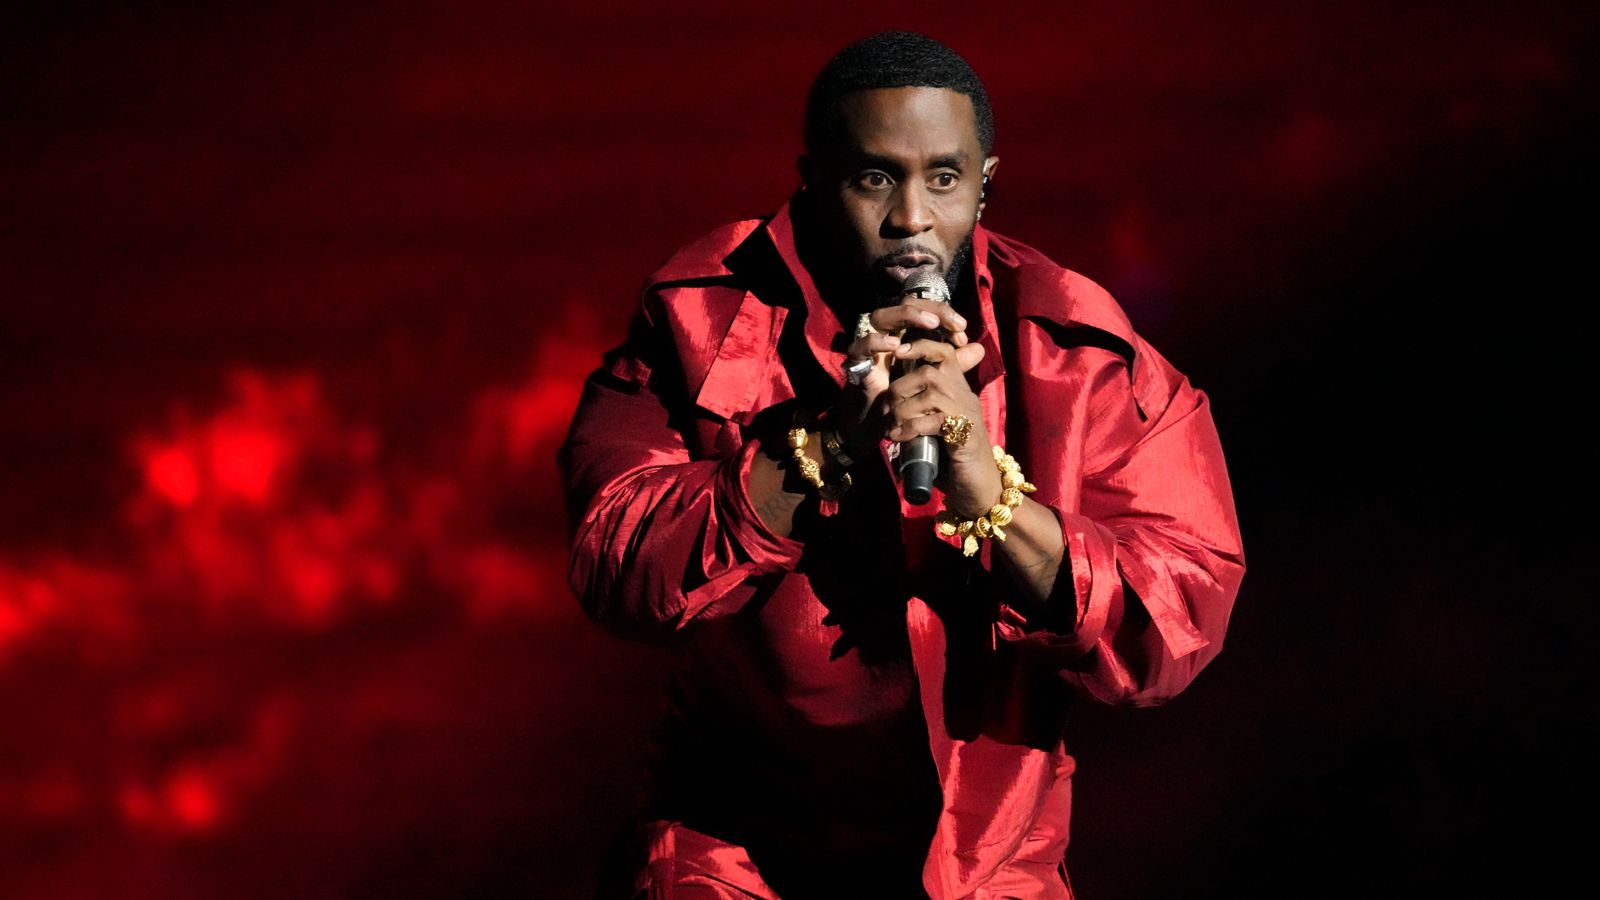 Sean 'Diddy' Combs accused of drugging and sexually assaulting woman in fresh lawsuit